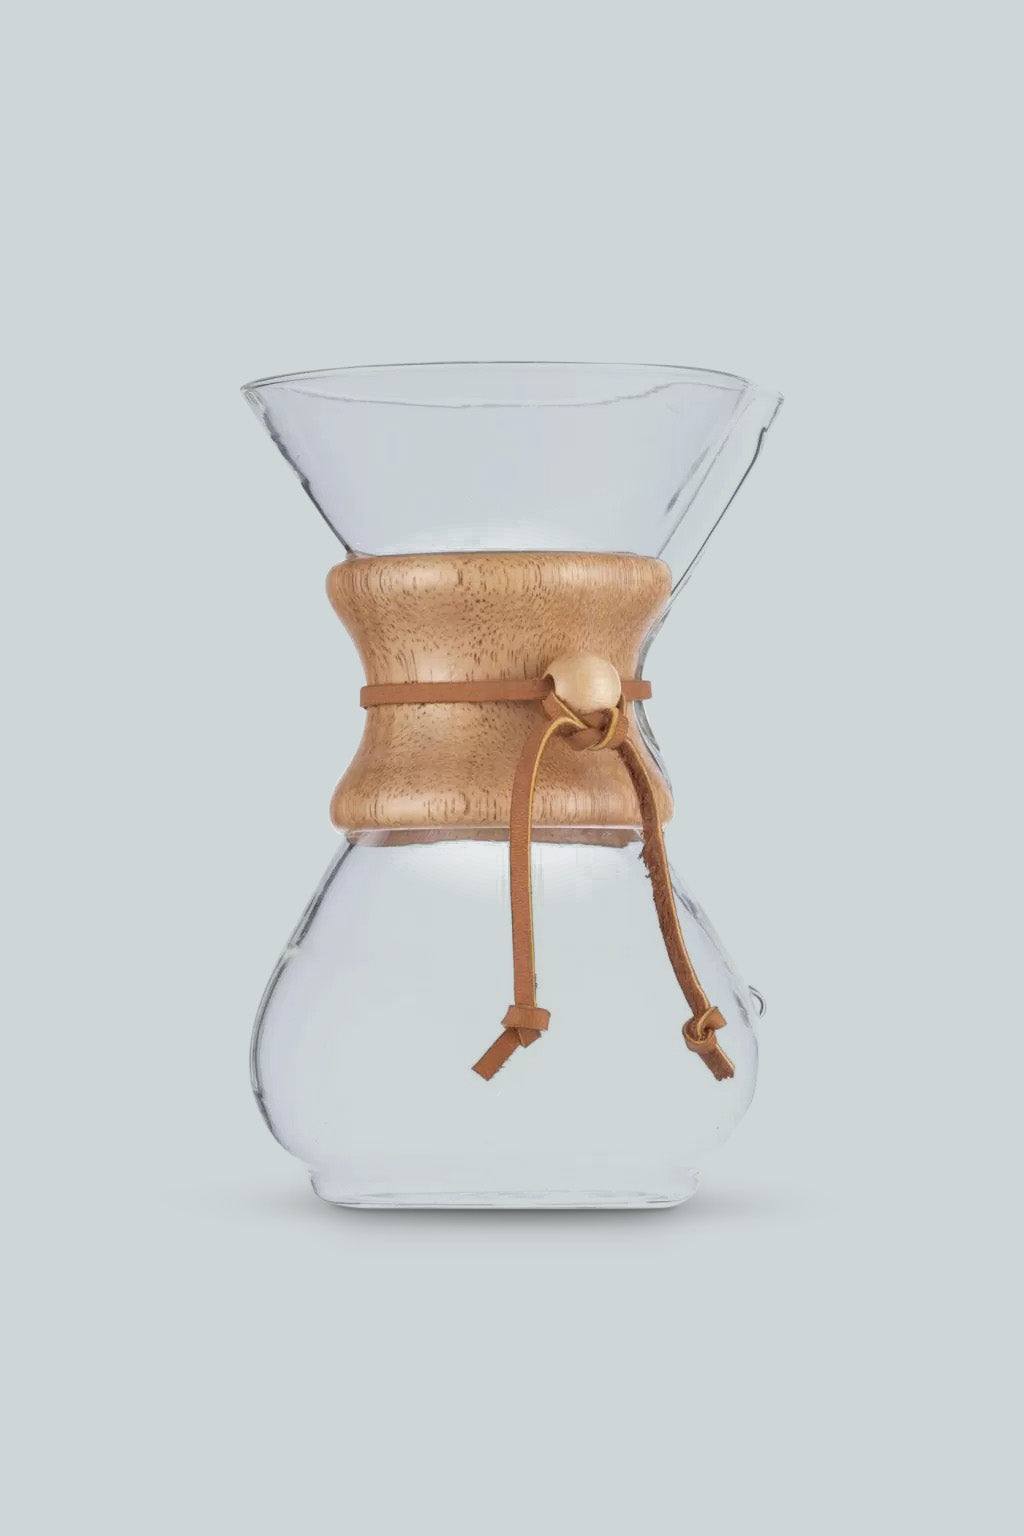 Chemex 6 Cup Classic Coffee Filter